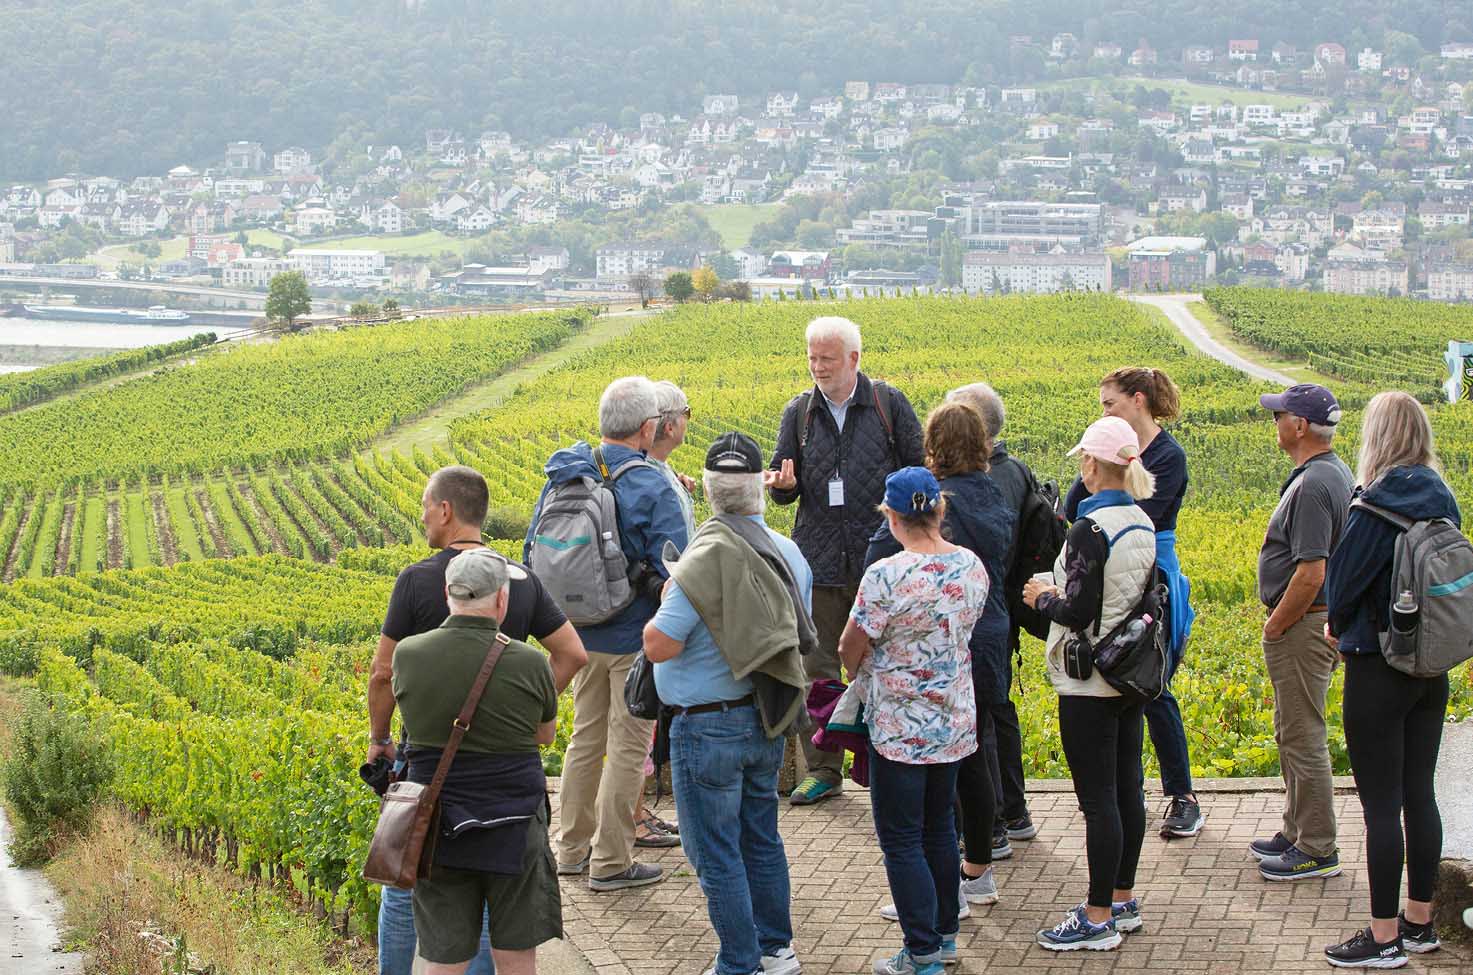 A group of guests being given a tour through the green vineyards of Niederwalddenkmal